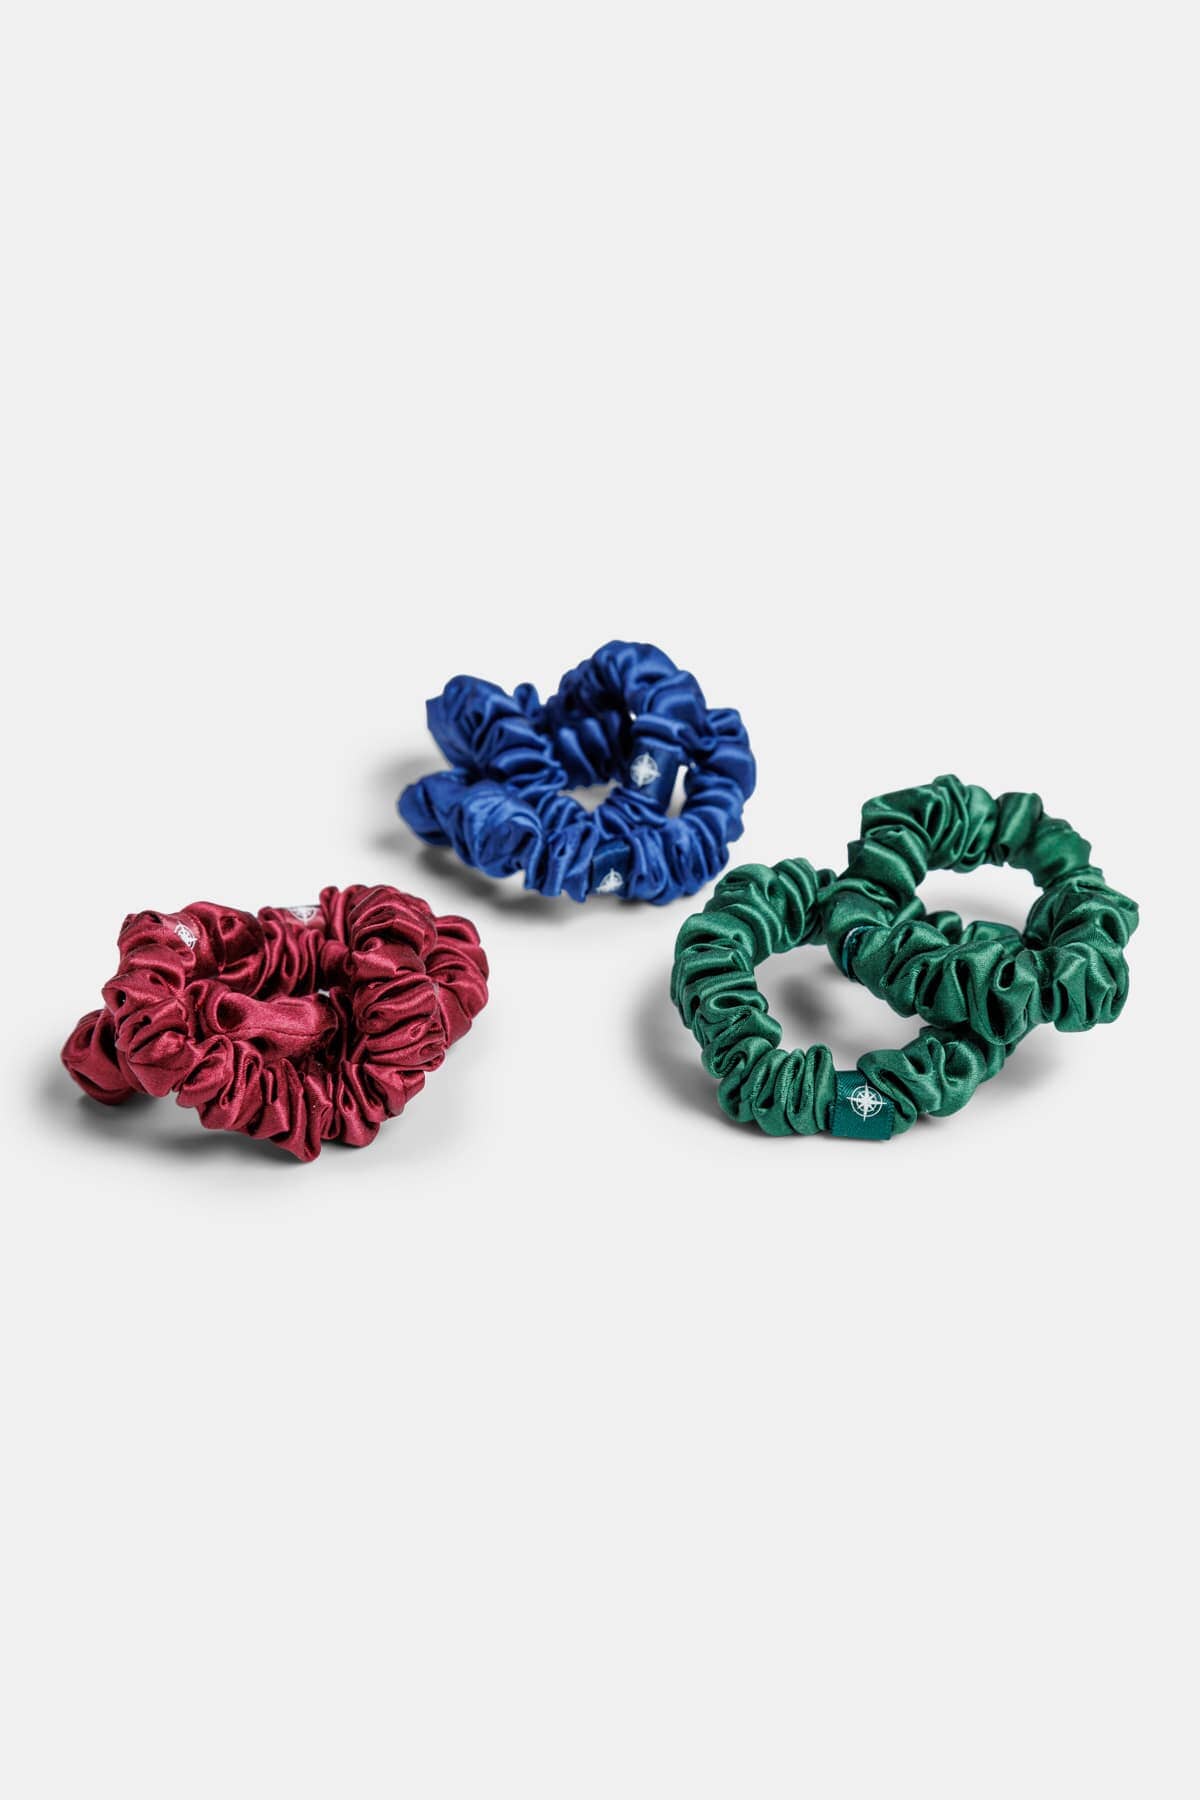 100% Pure Mulberry Silk Hair Scrunchies with Gift Box - Set of 6 Skinny Hair Ties Womens&gt;Beauty&gt;Hair Care Fishers Finery Navy-Hunter Green-Burgundy 